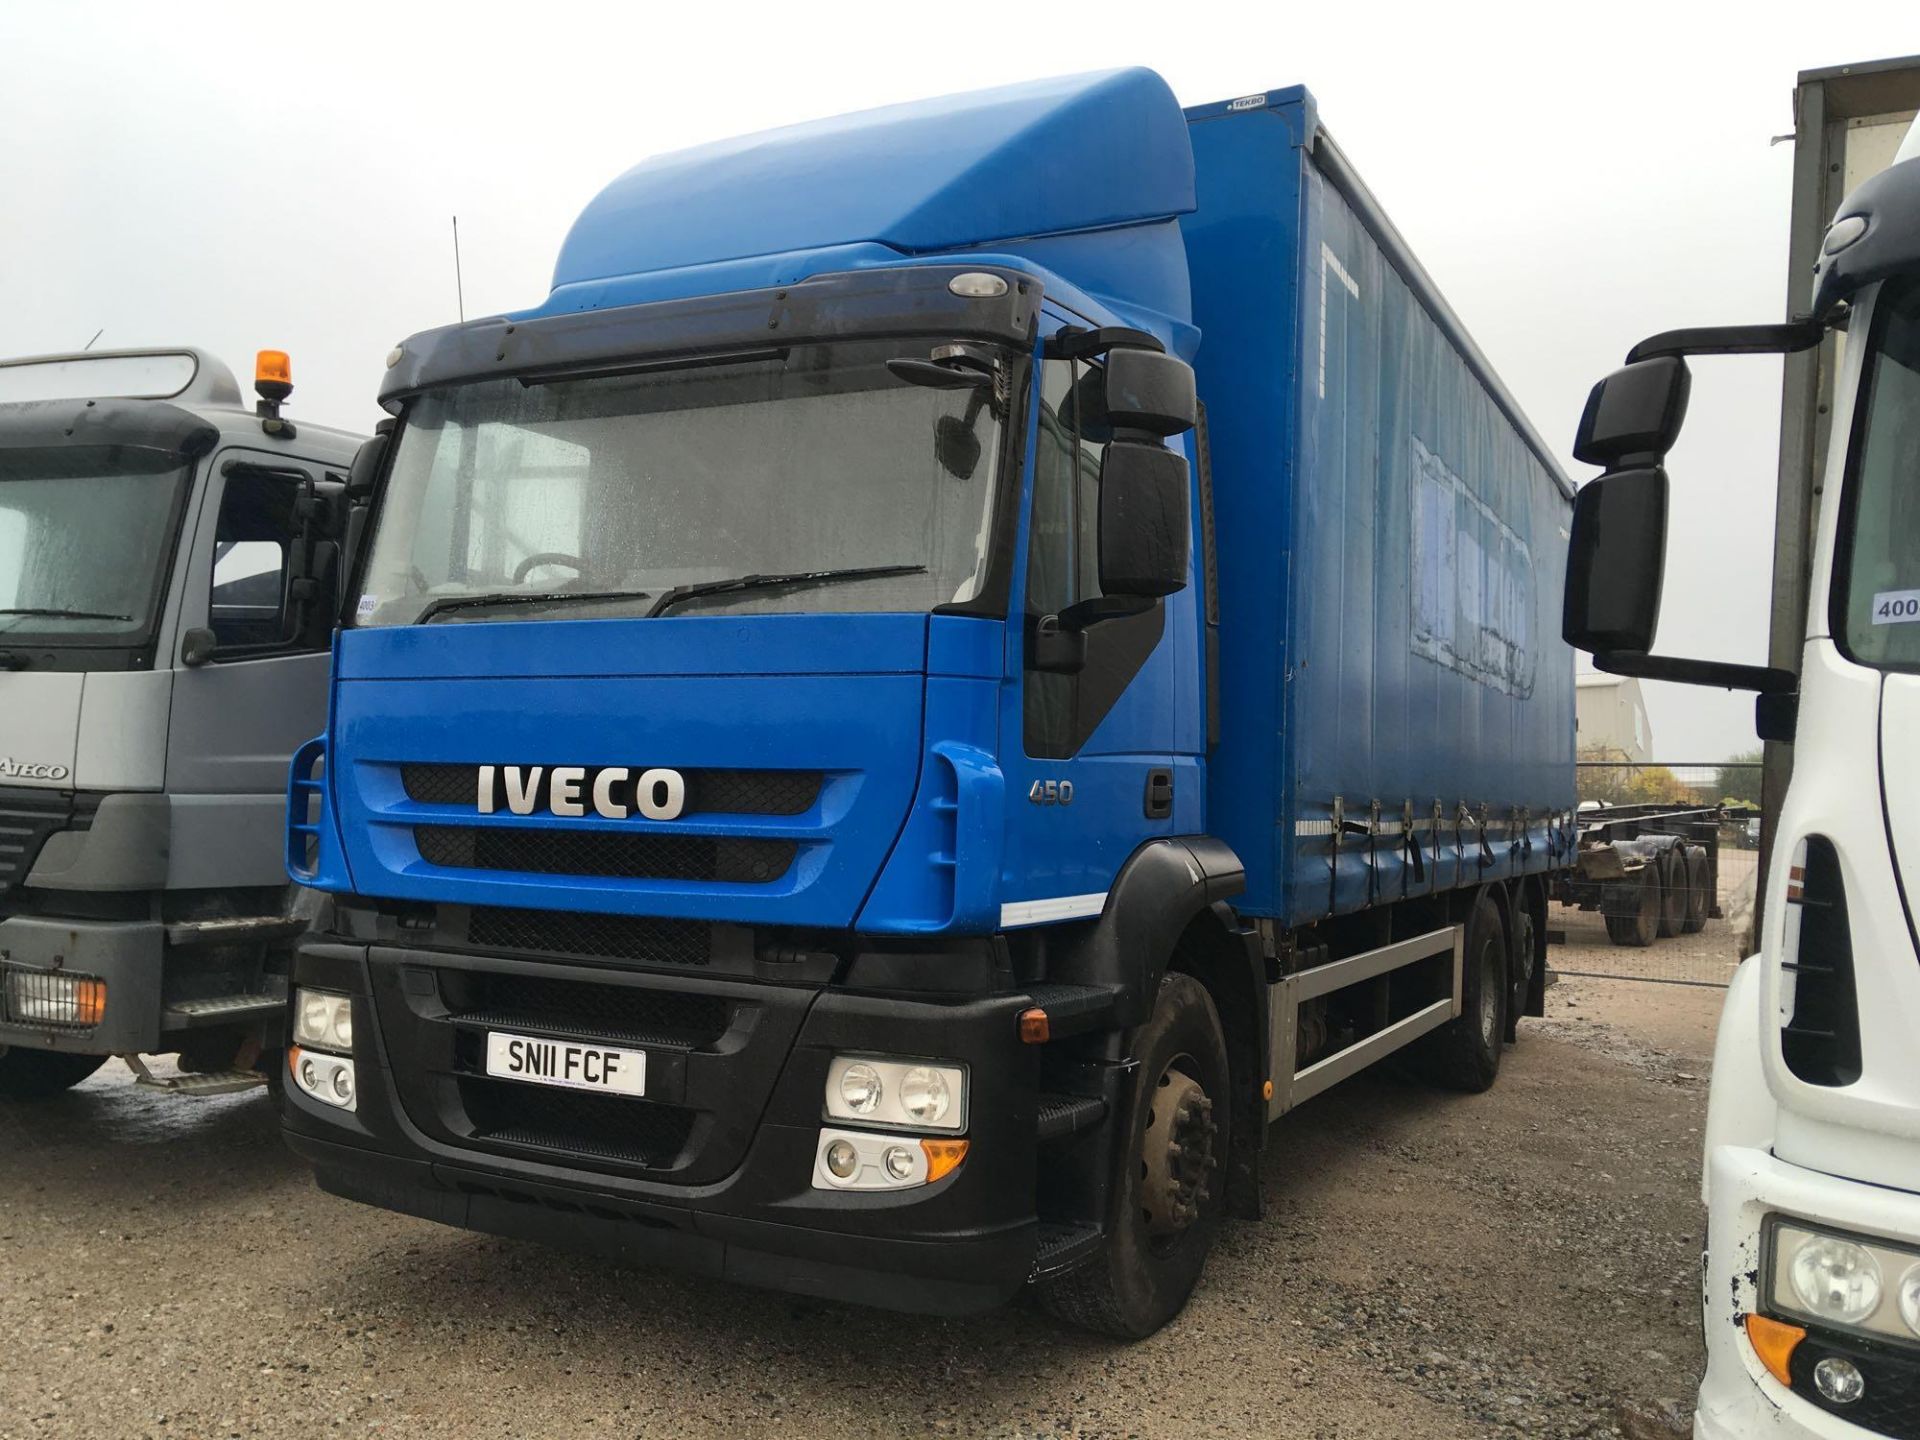 Iveco Stralis AD260545YPS- 10308cc Truck - Image 2 of 4